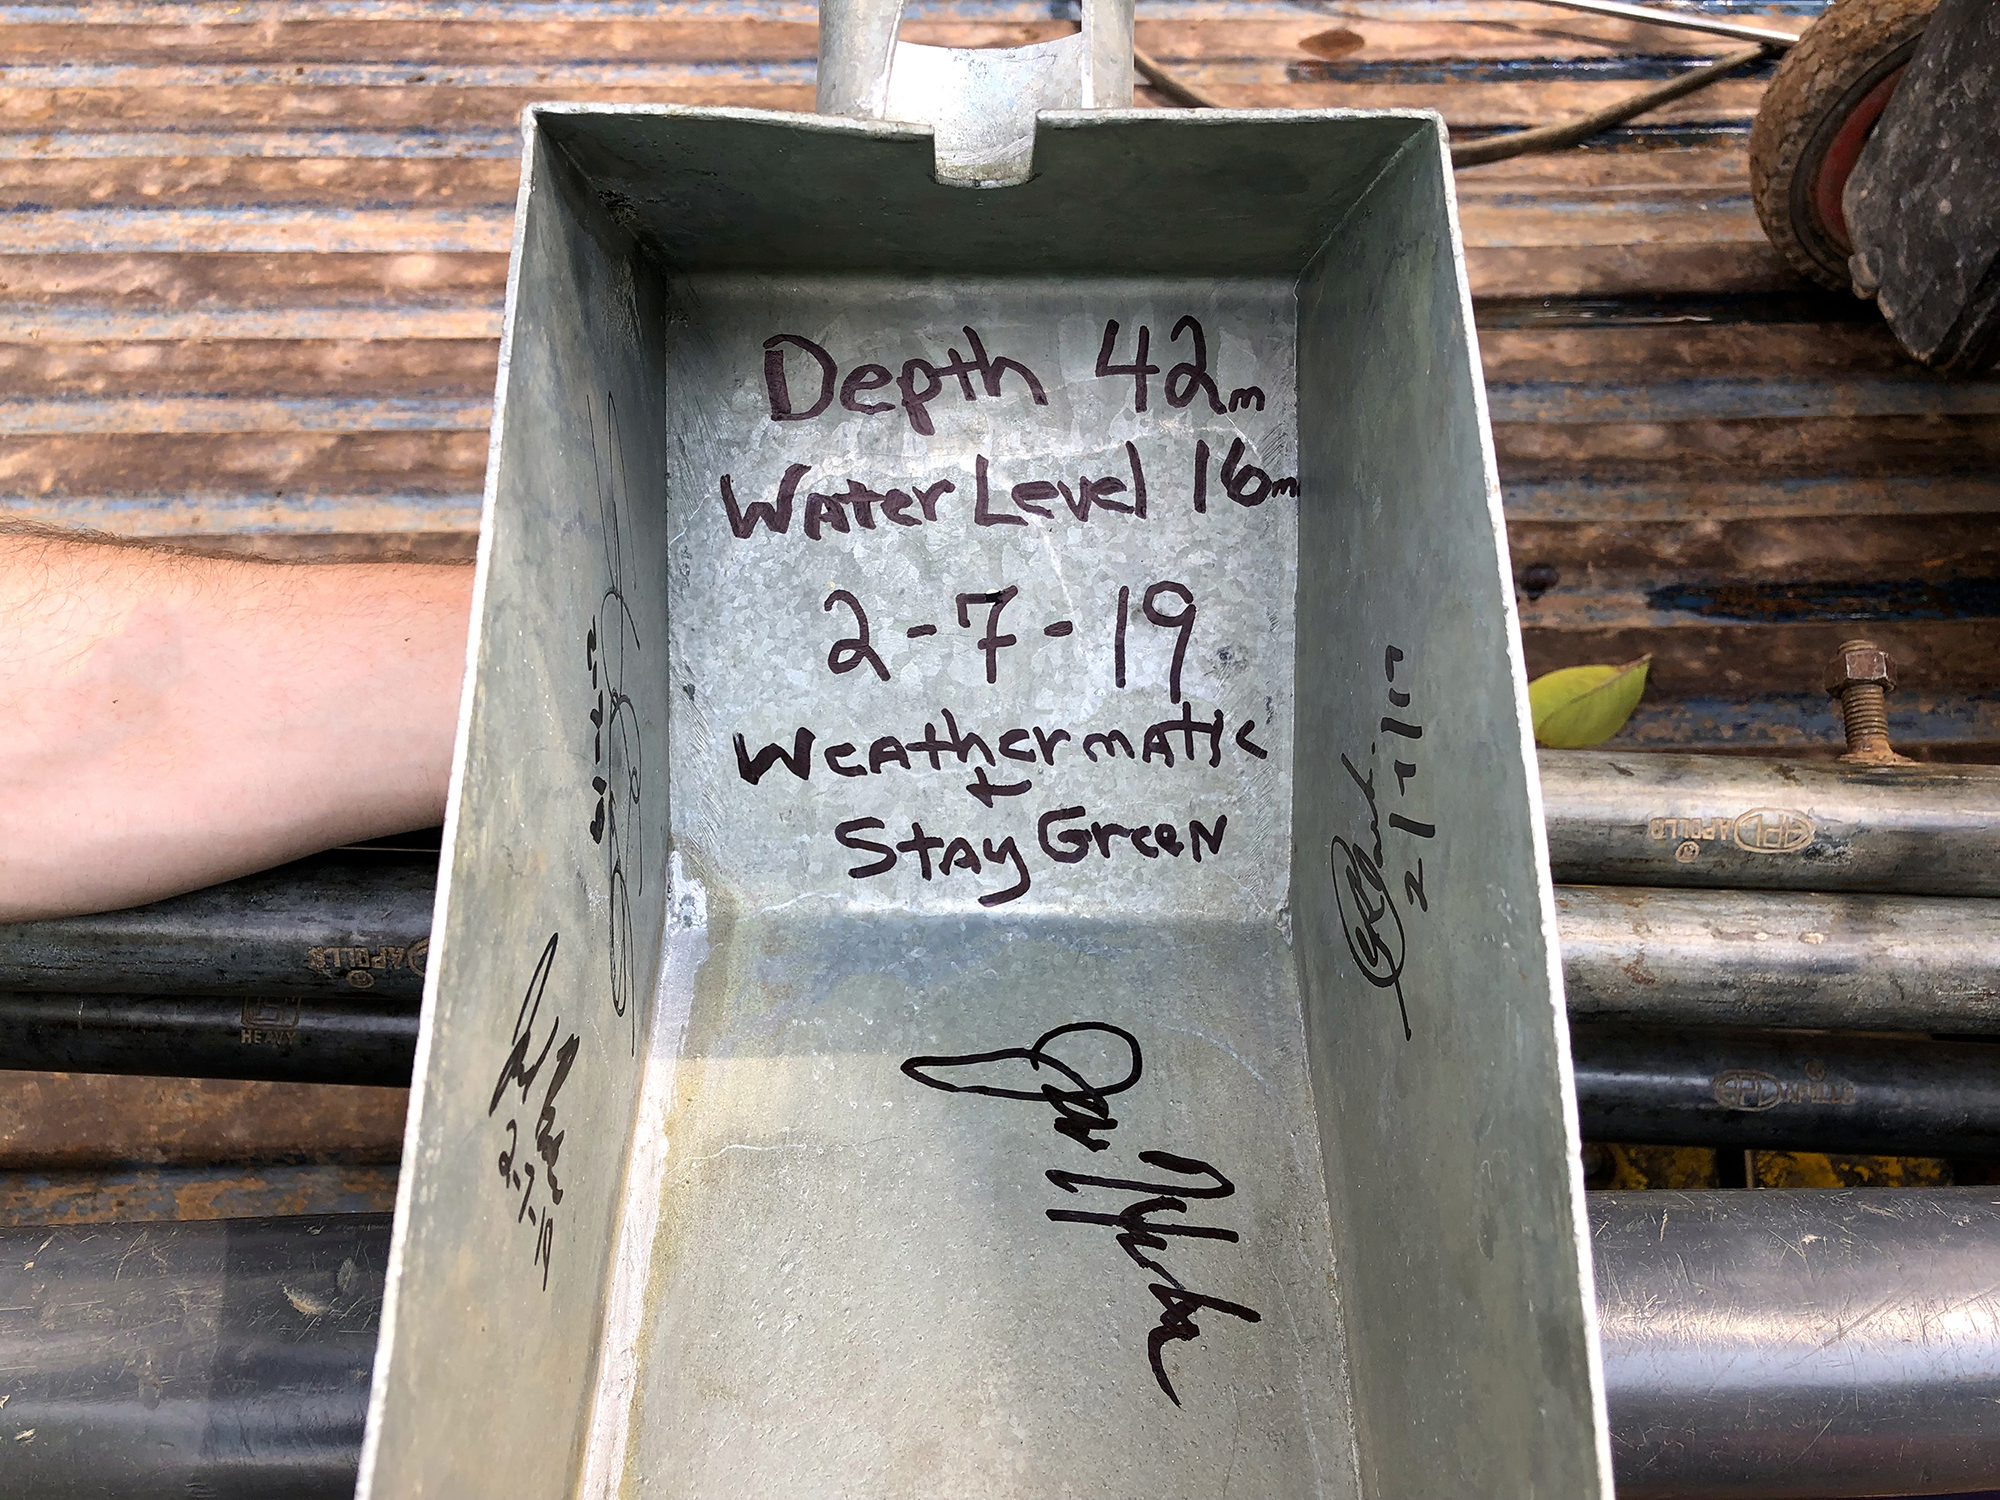 The team autographed a part of the well to celebrate the new installation.